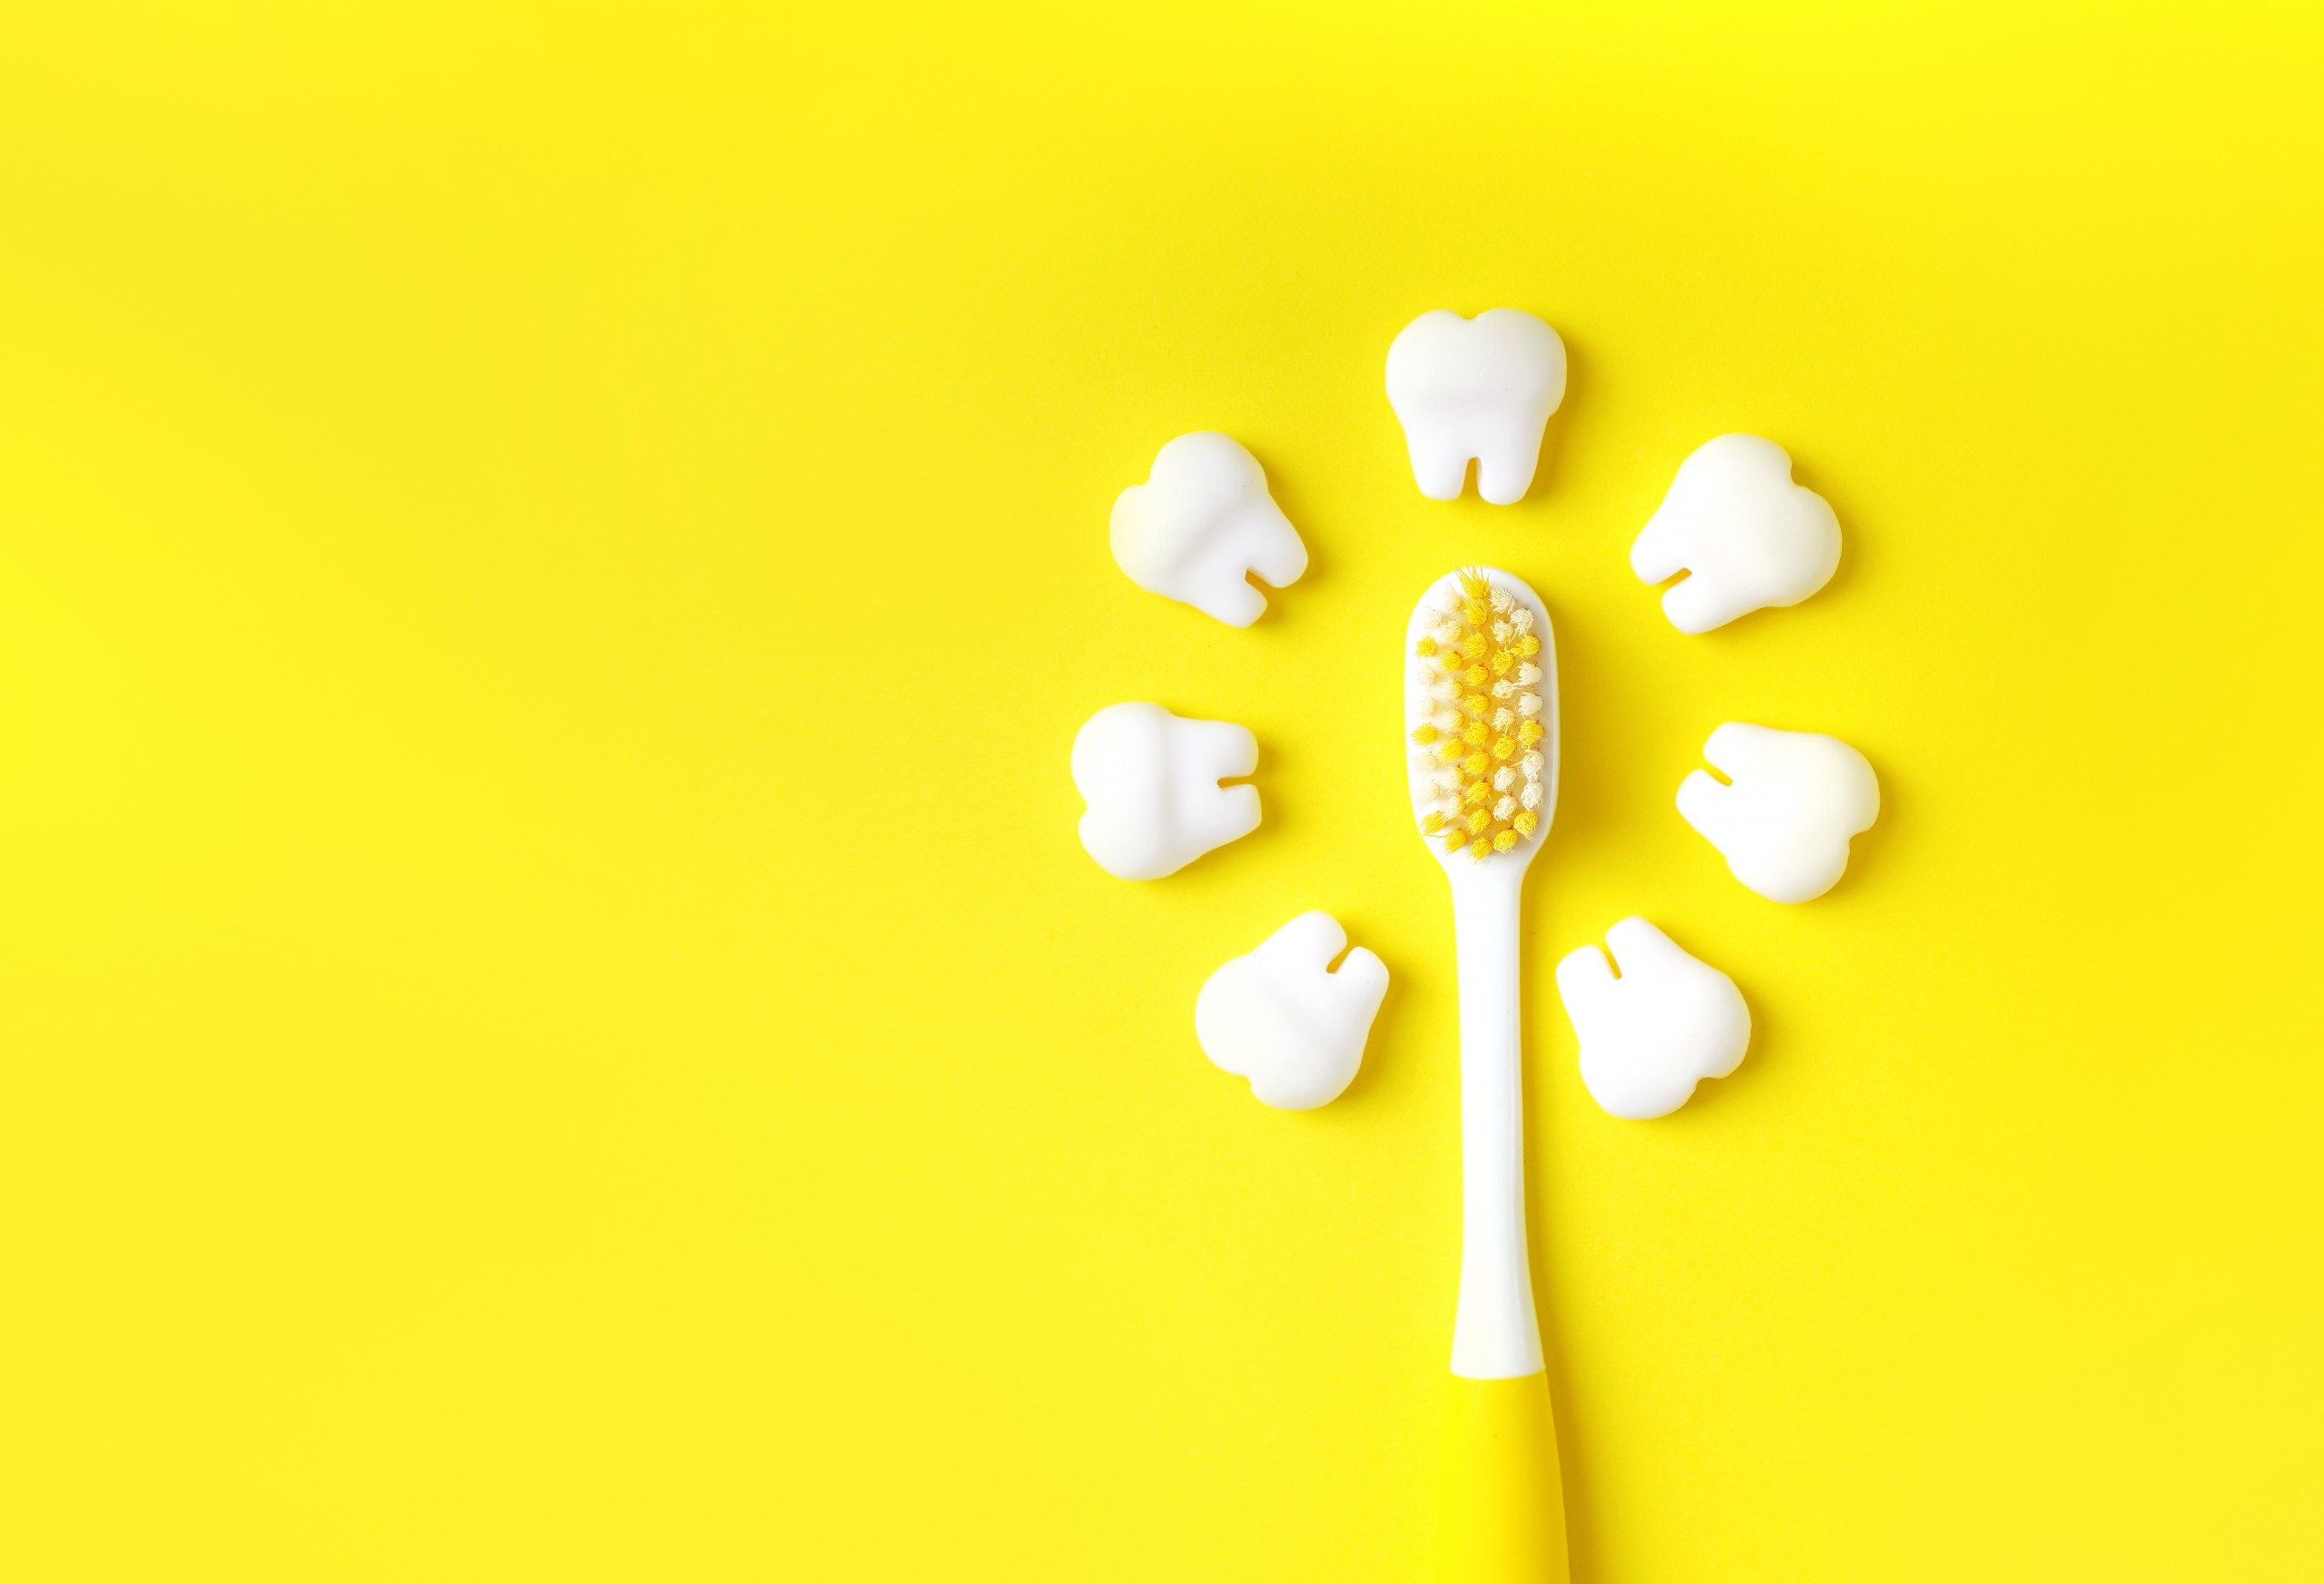 Toothbrush with teeth models making sun on a yellow background. Copy space.